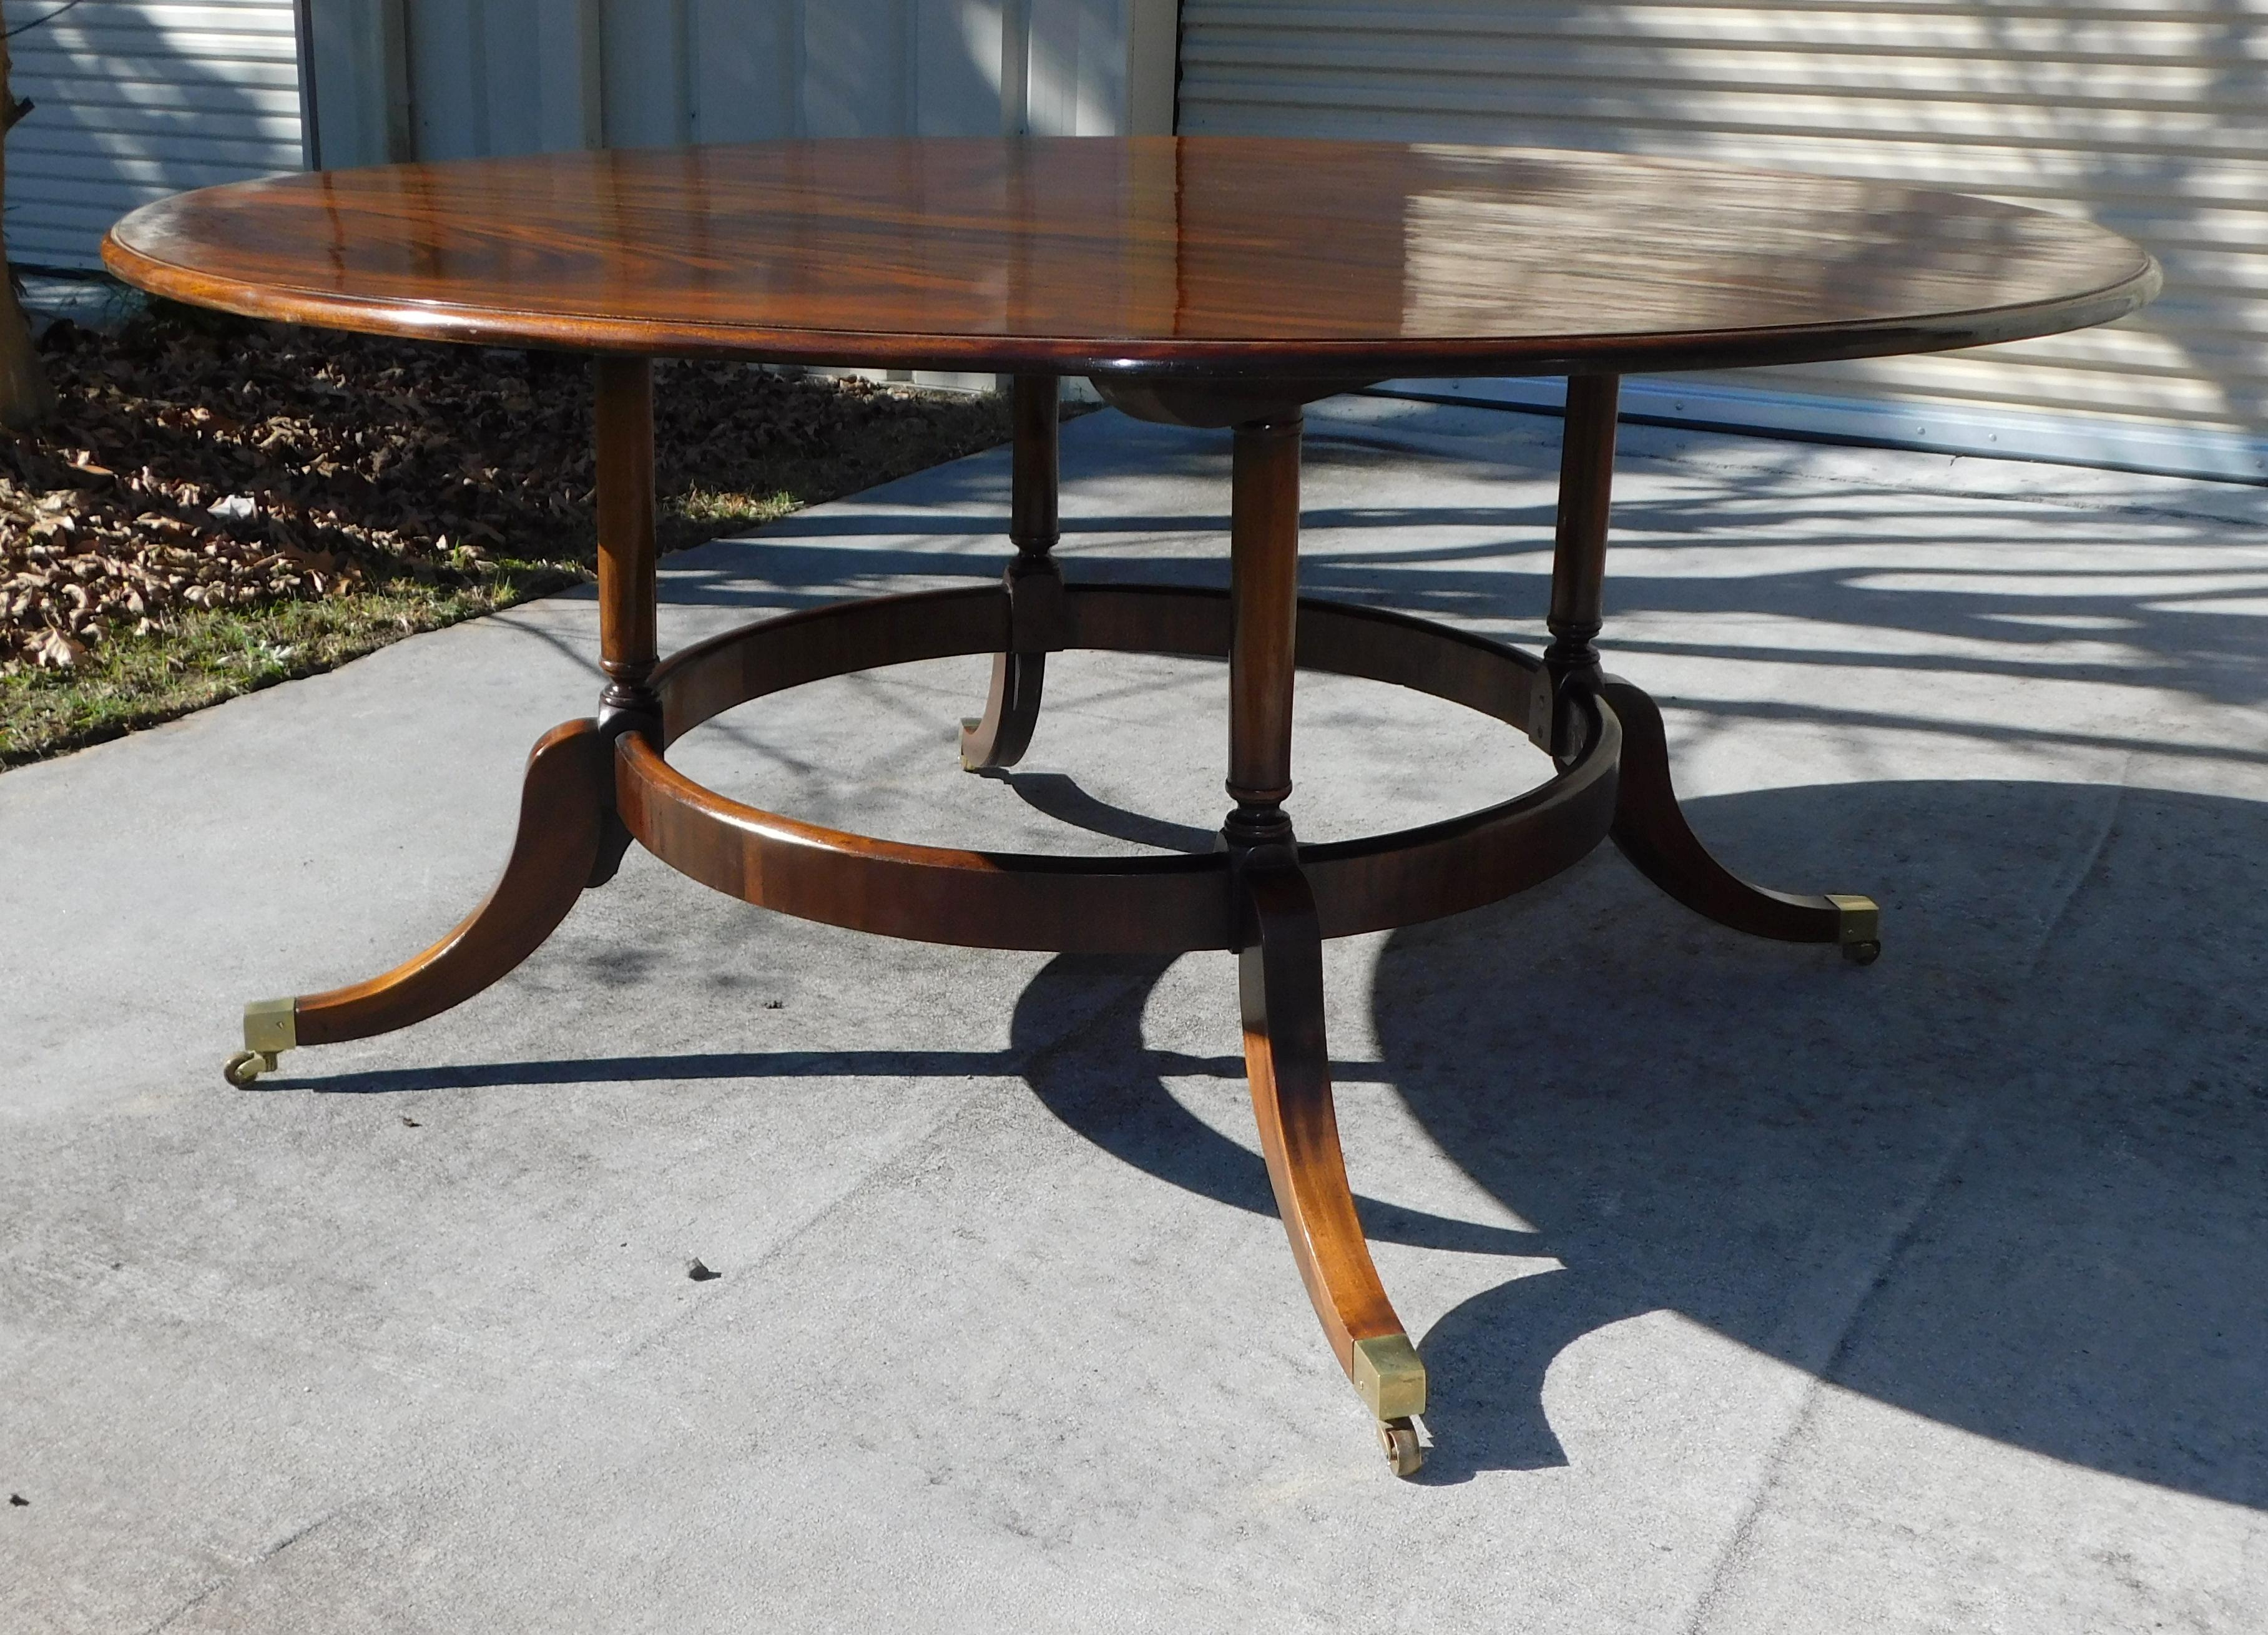 English Regency Mahogany Circular Dining Table with Splayed Legs on Casters 1850 In Excellent Condition For Sale In Hollywood, SC